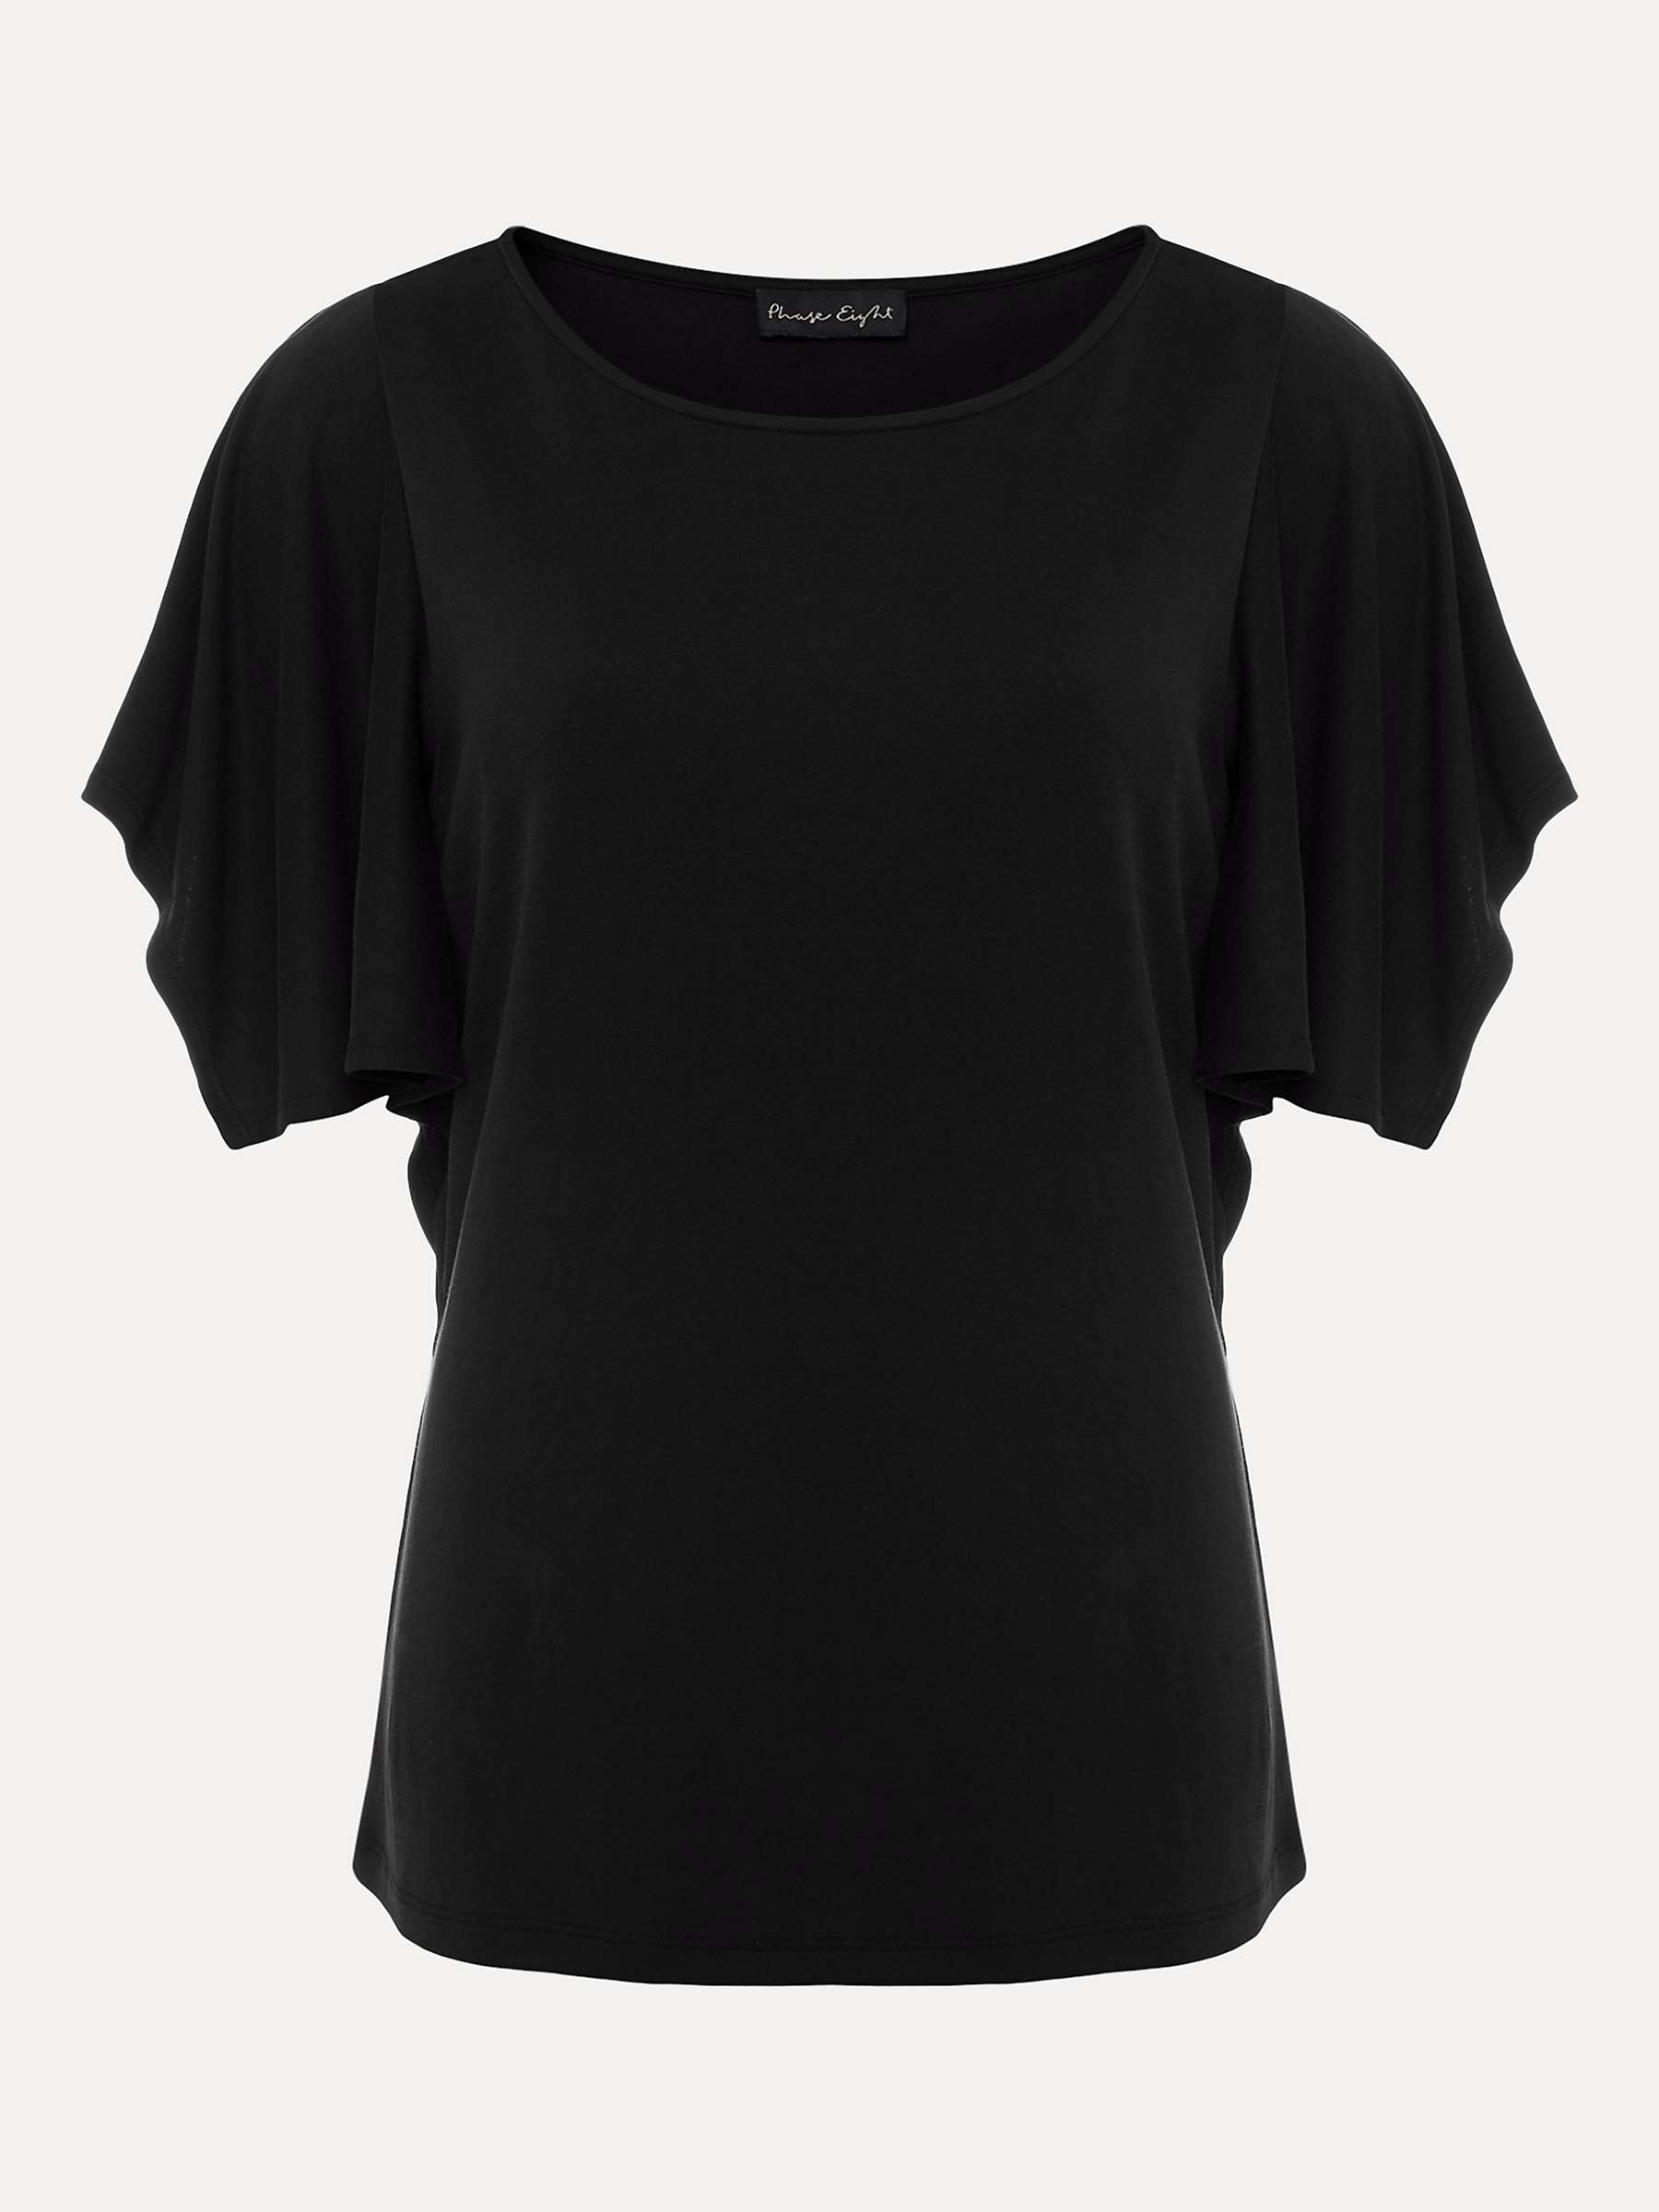 Phase Eight Izzabella Frill Sleeve Top, Black at John Lewis & Partners